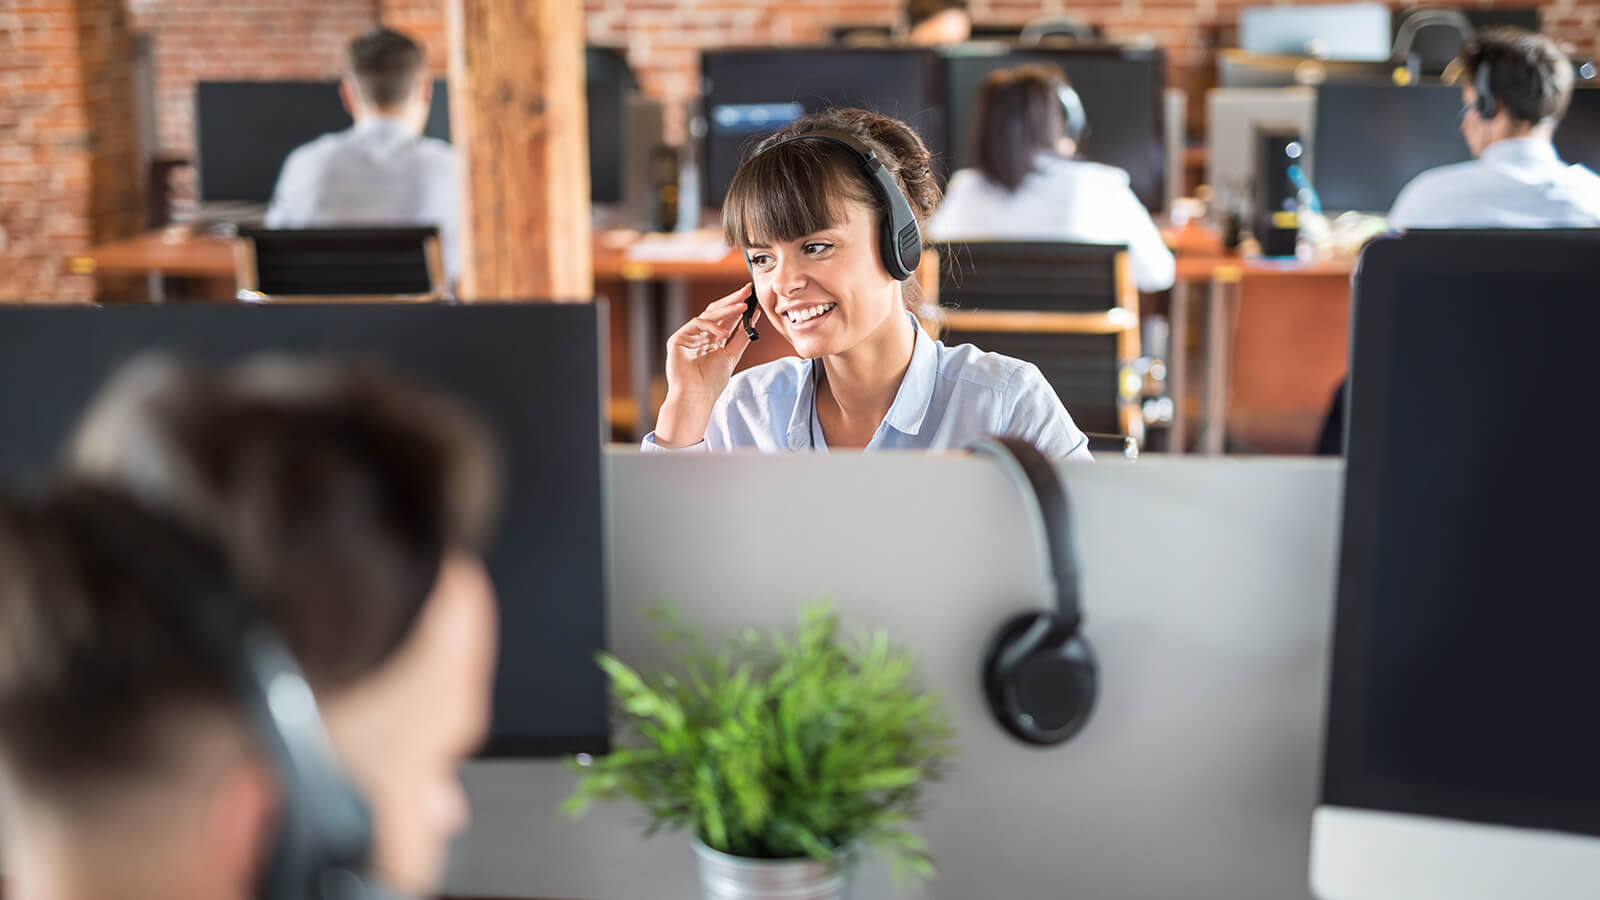 Leading Contact Center Improves Voice Service Reliability with Transformative Visibility